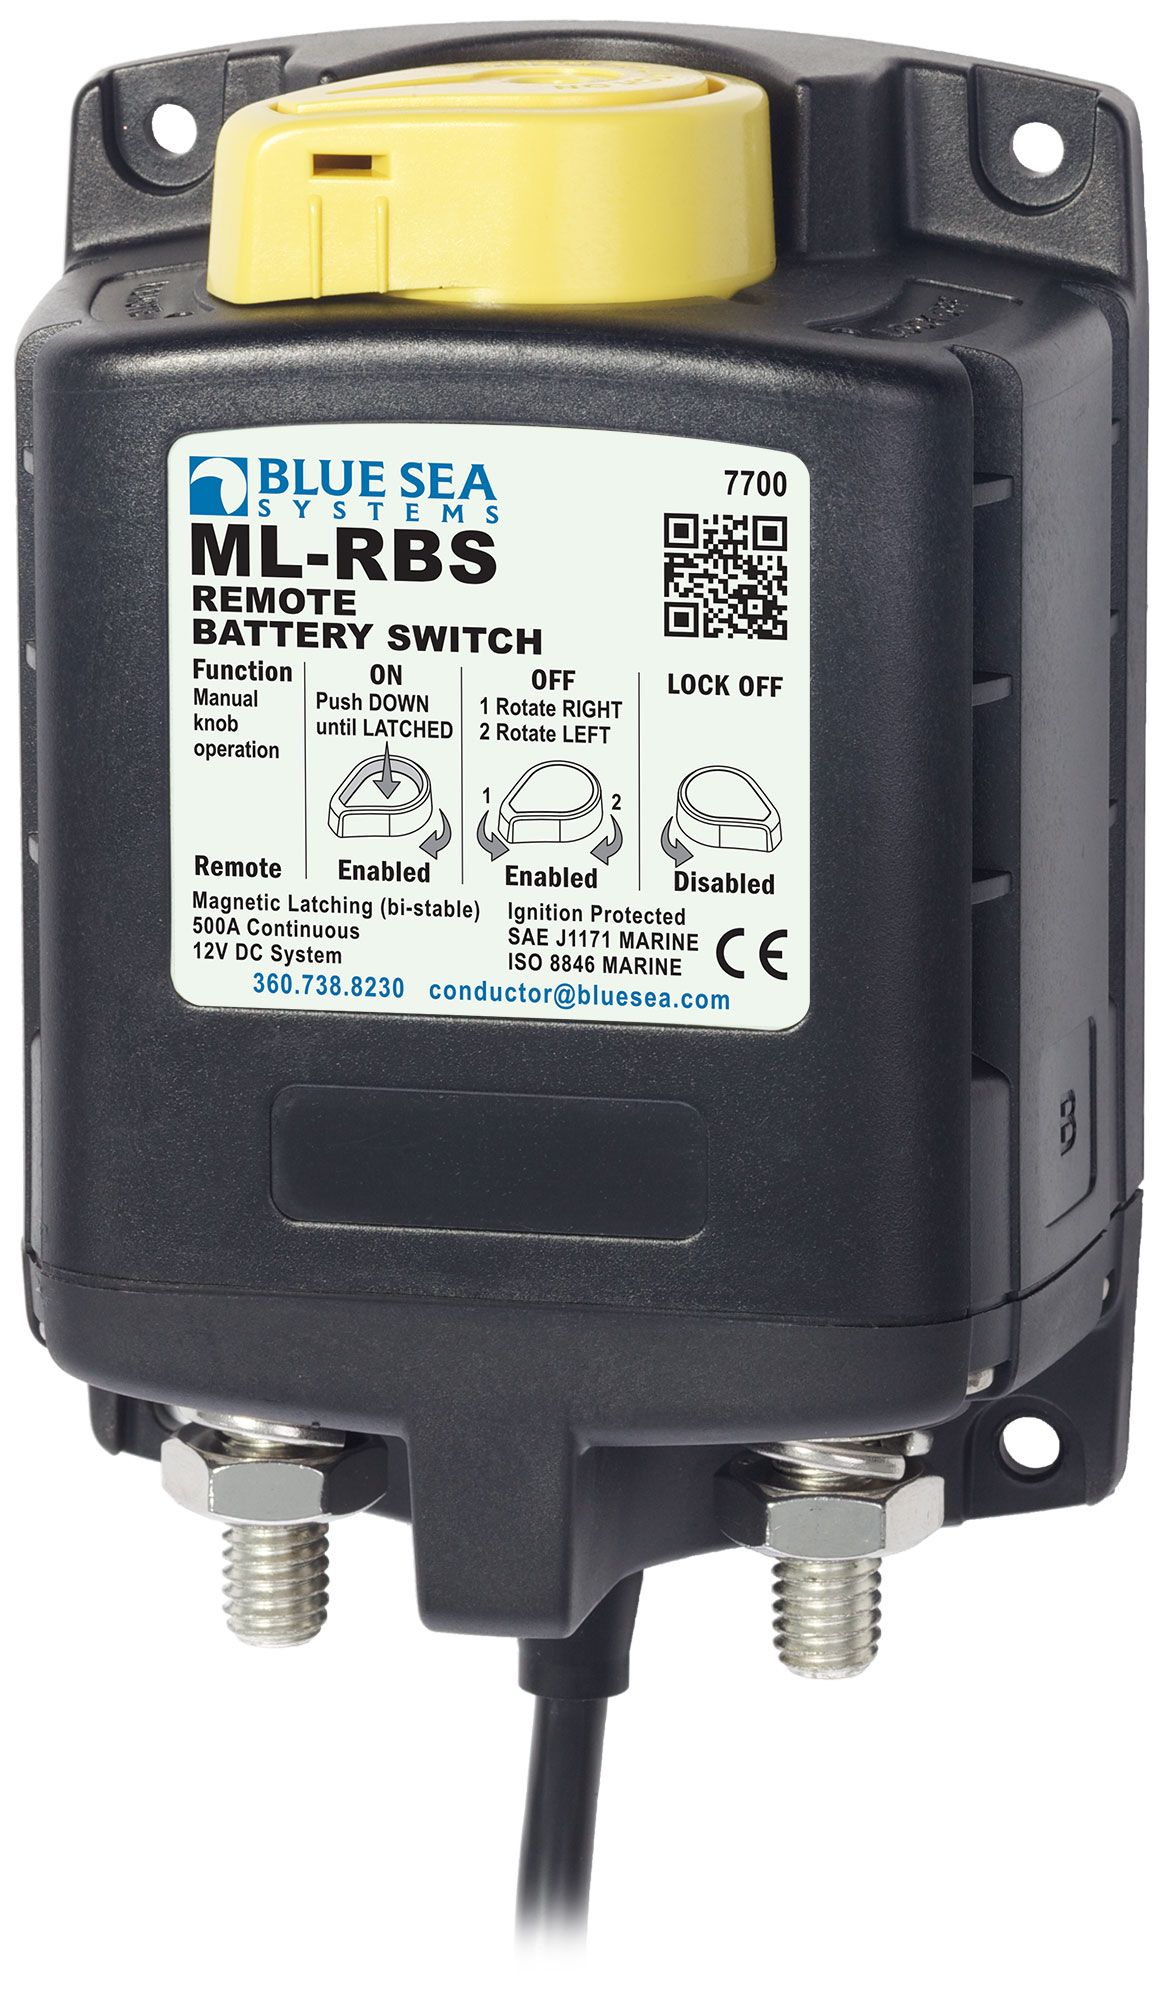 Part # 7700100B  Manufacturer Blue Sea Systems  Product Type Remote Battery Disconnects